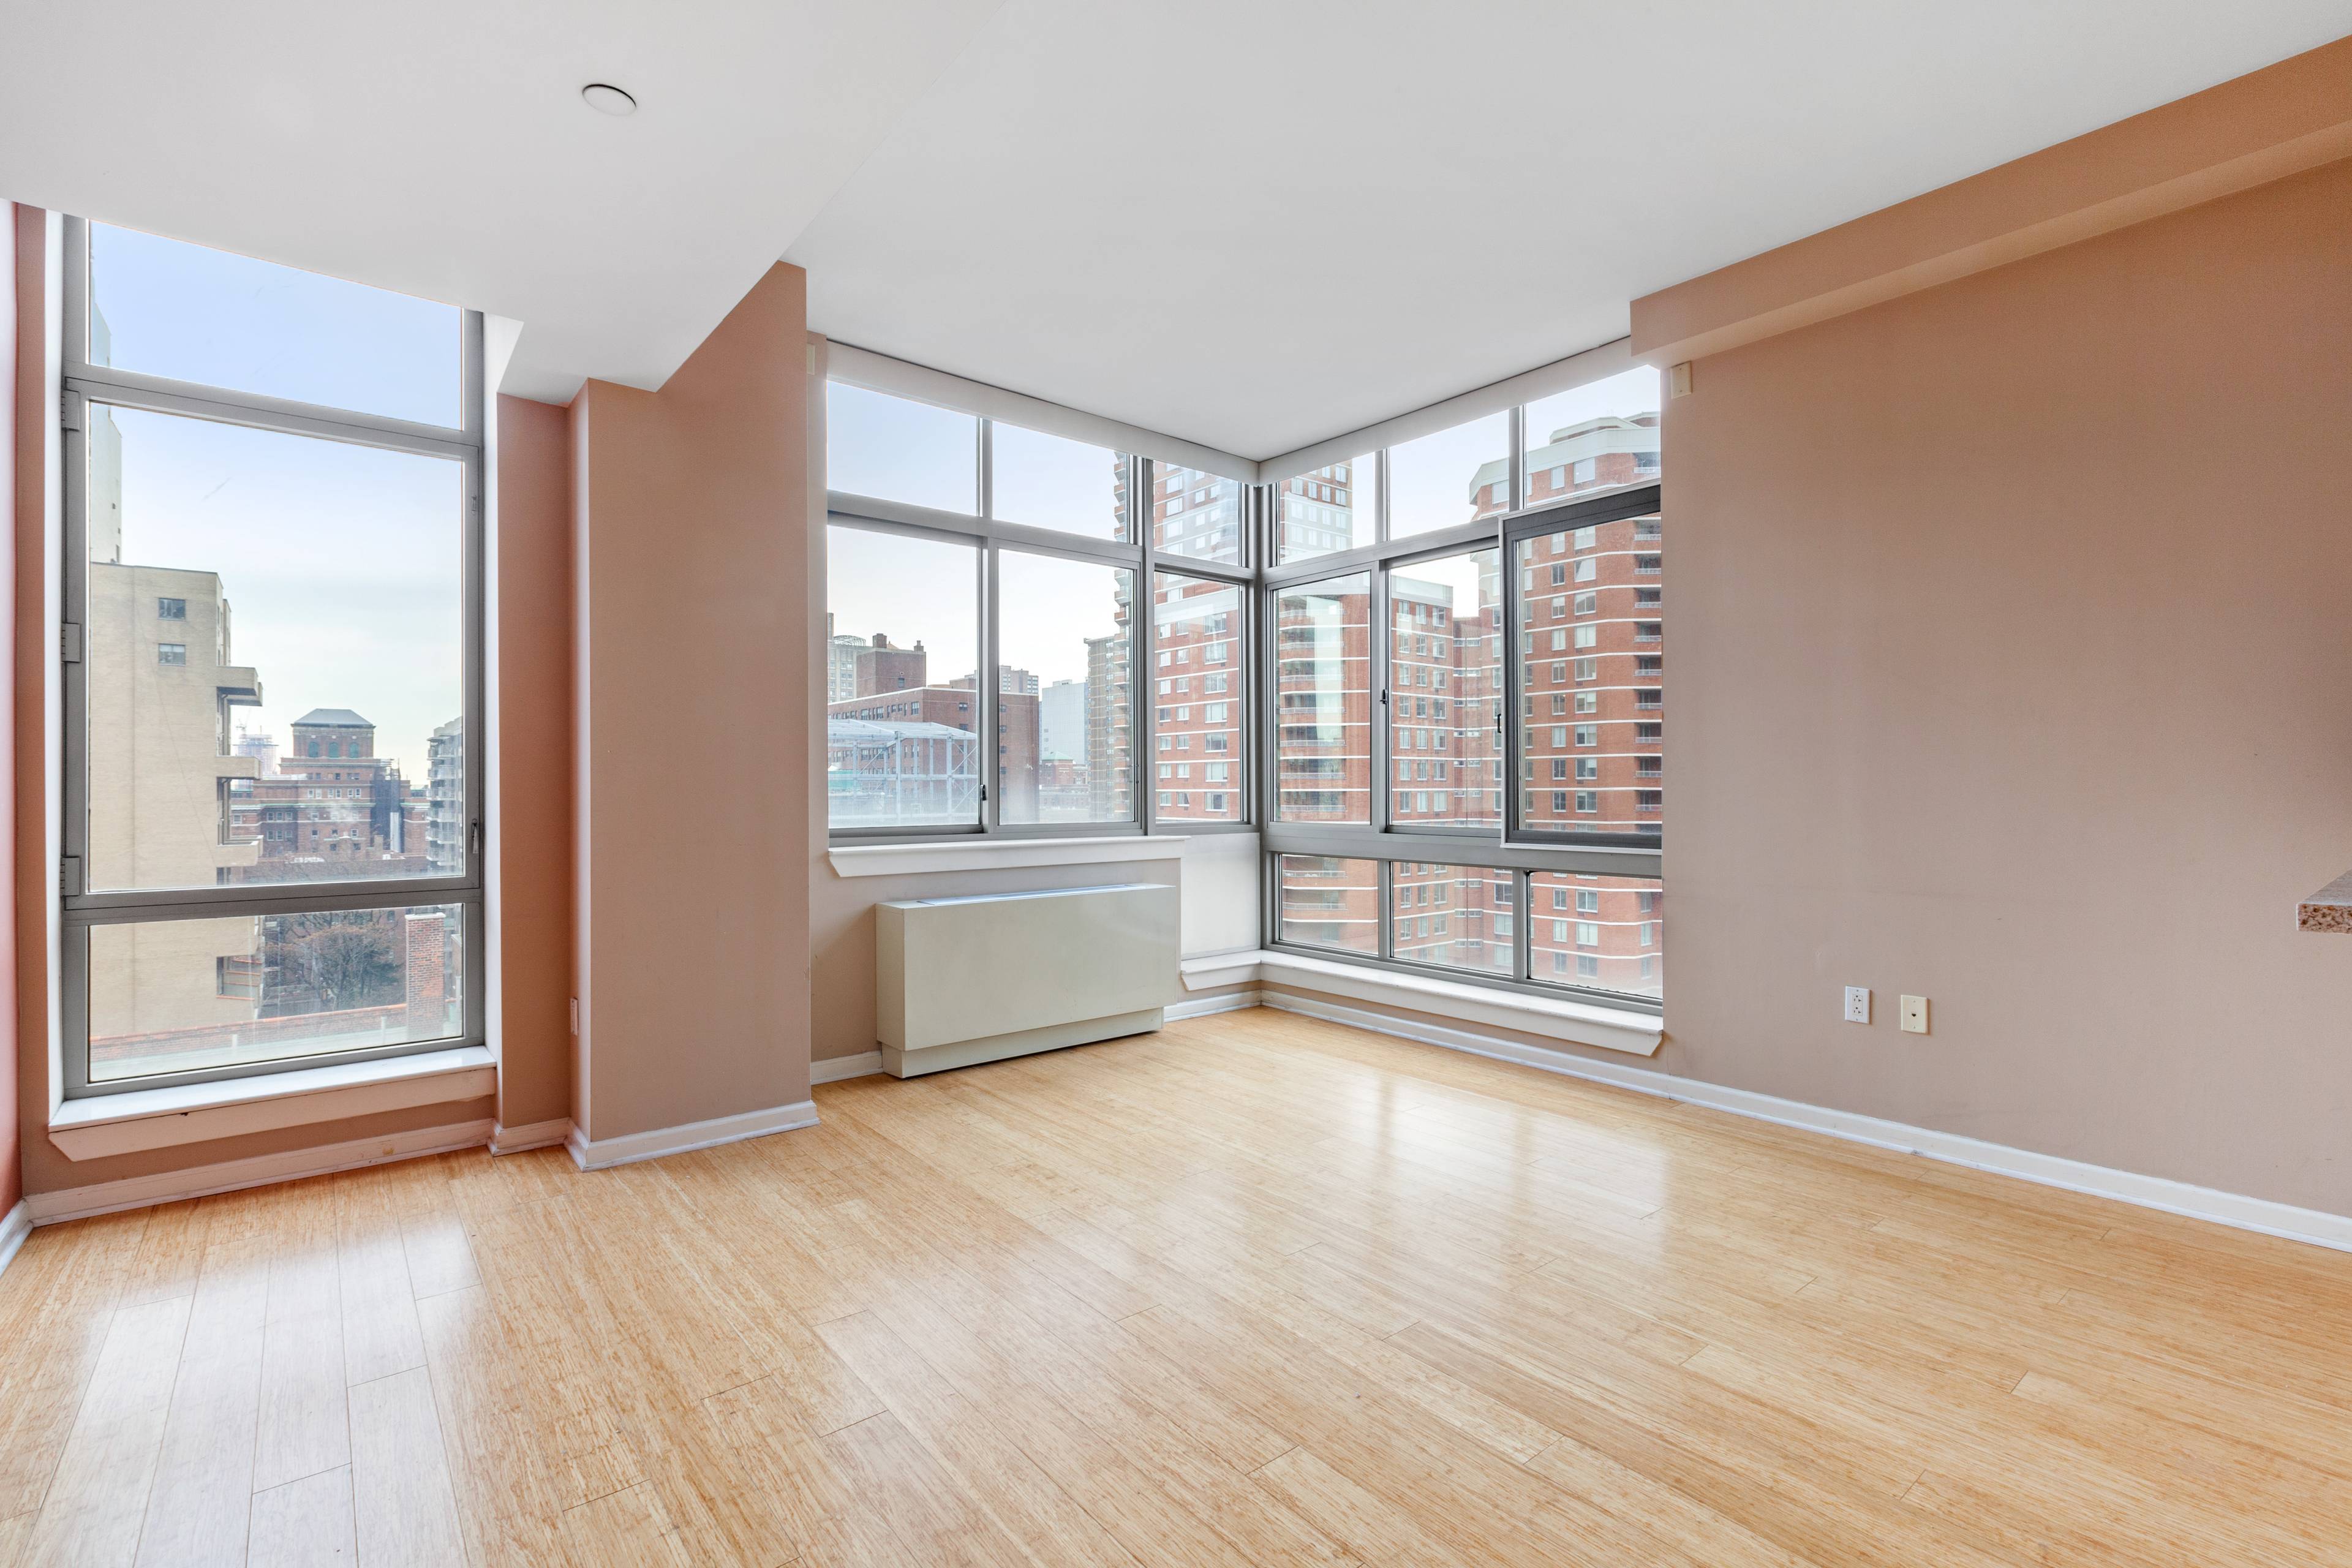 Beautiful corner unit one bedroom apartment with excellent city views in a well managed and maintained full service Kips Bay condo near all the conveniences.